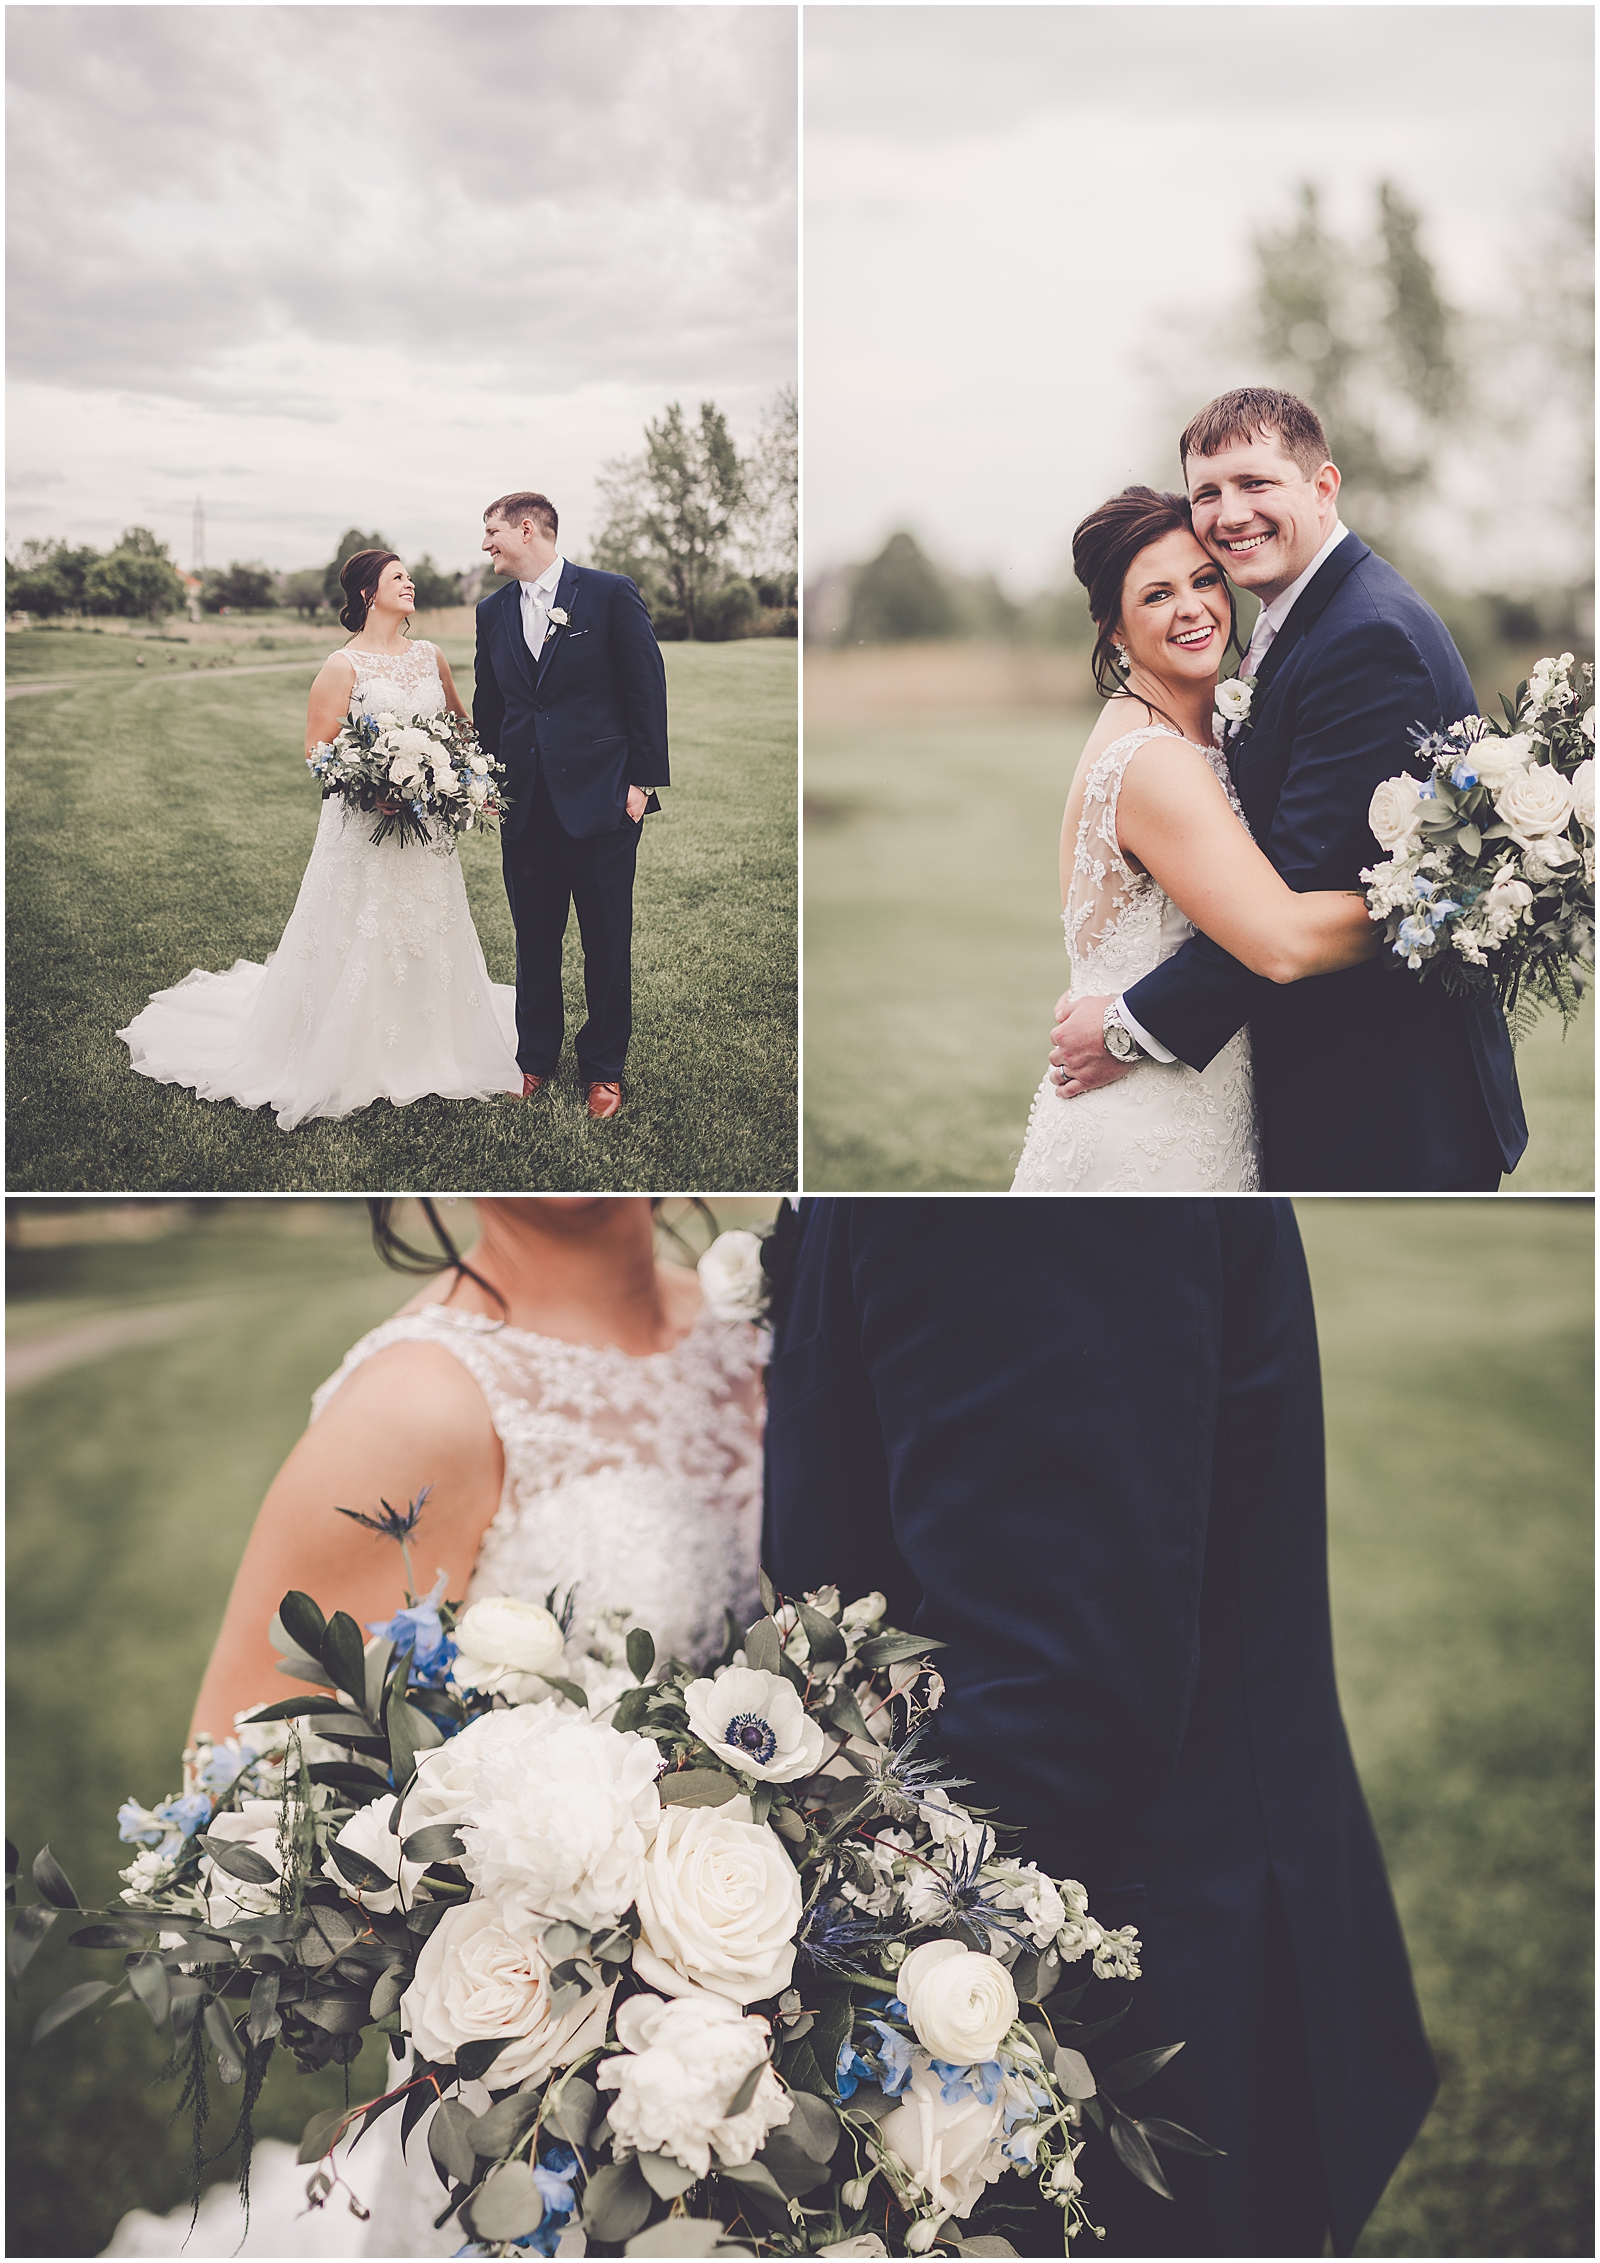 Taylor and Karl's May Ruffled Feathers Golf Club wedding day in Lemont, IL with Chicagoland wedding photographer Kara Evans Photographer.